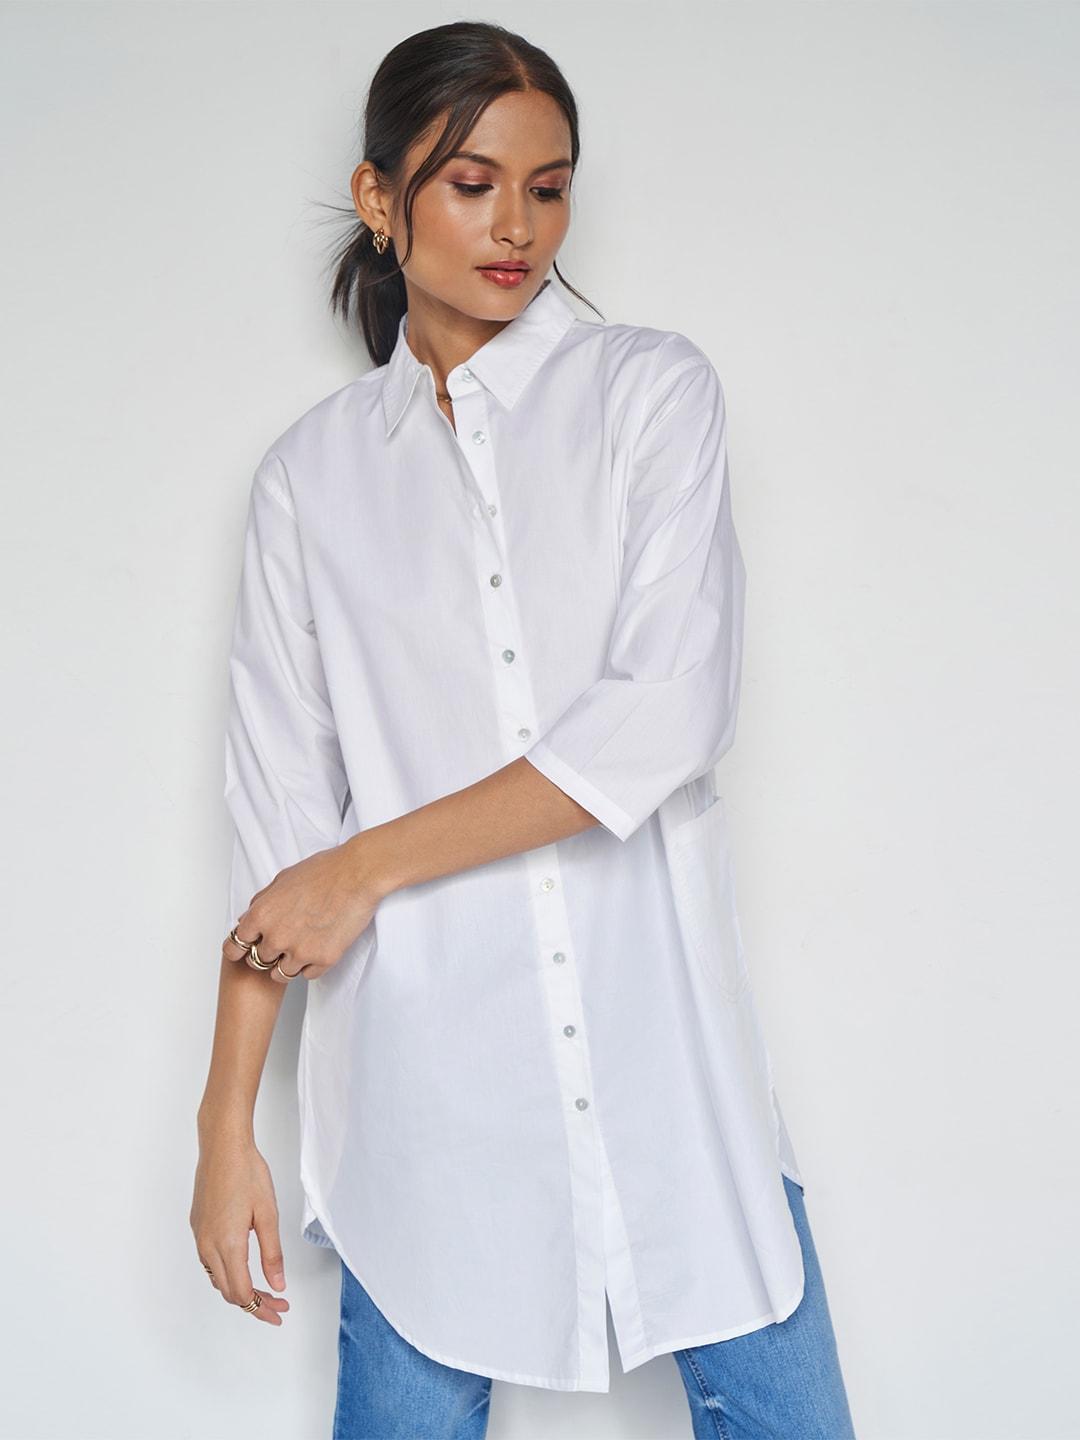 and-cotton-shirt-style-top